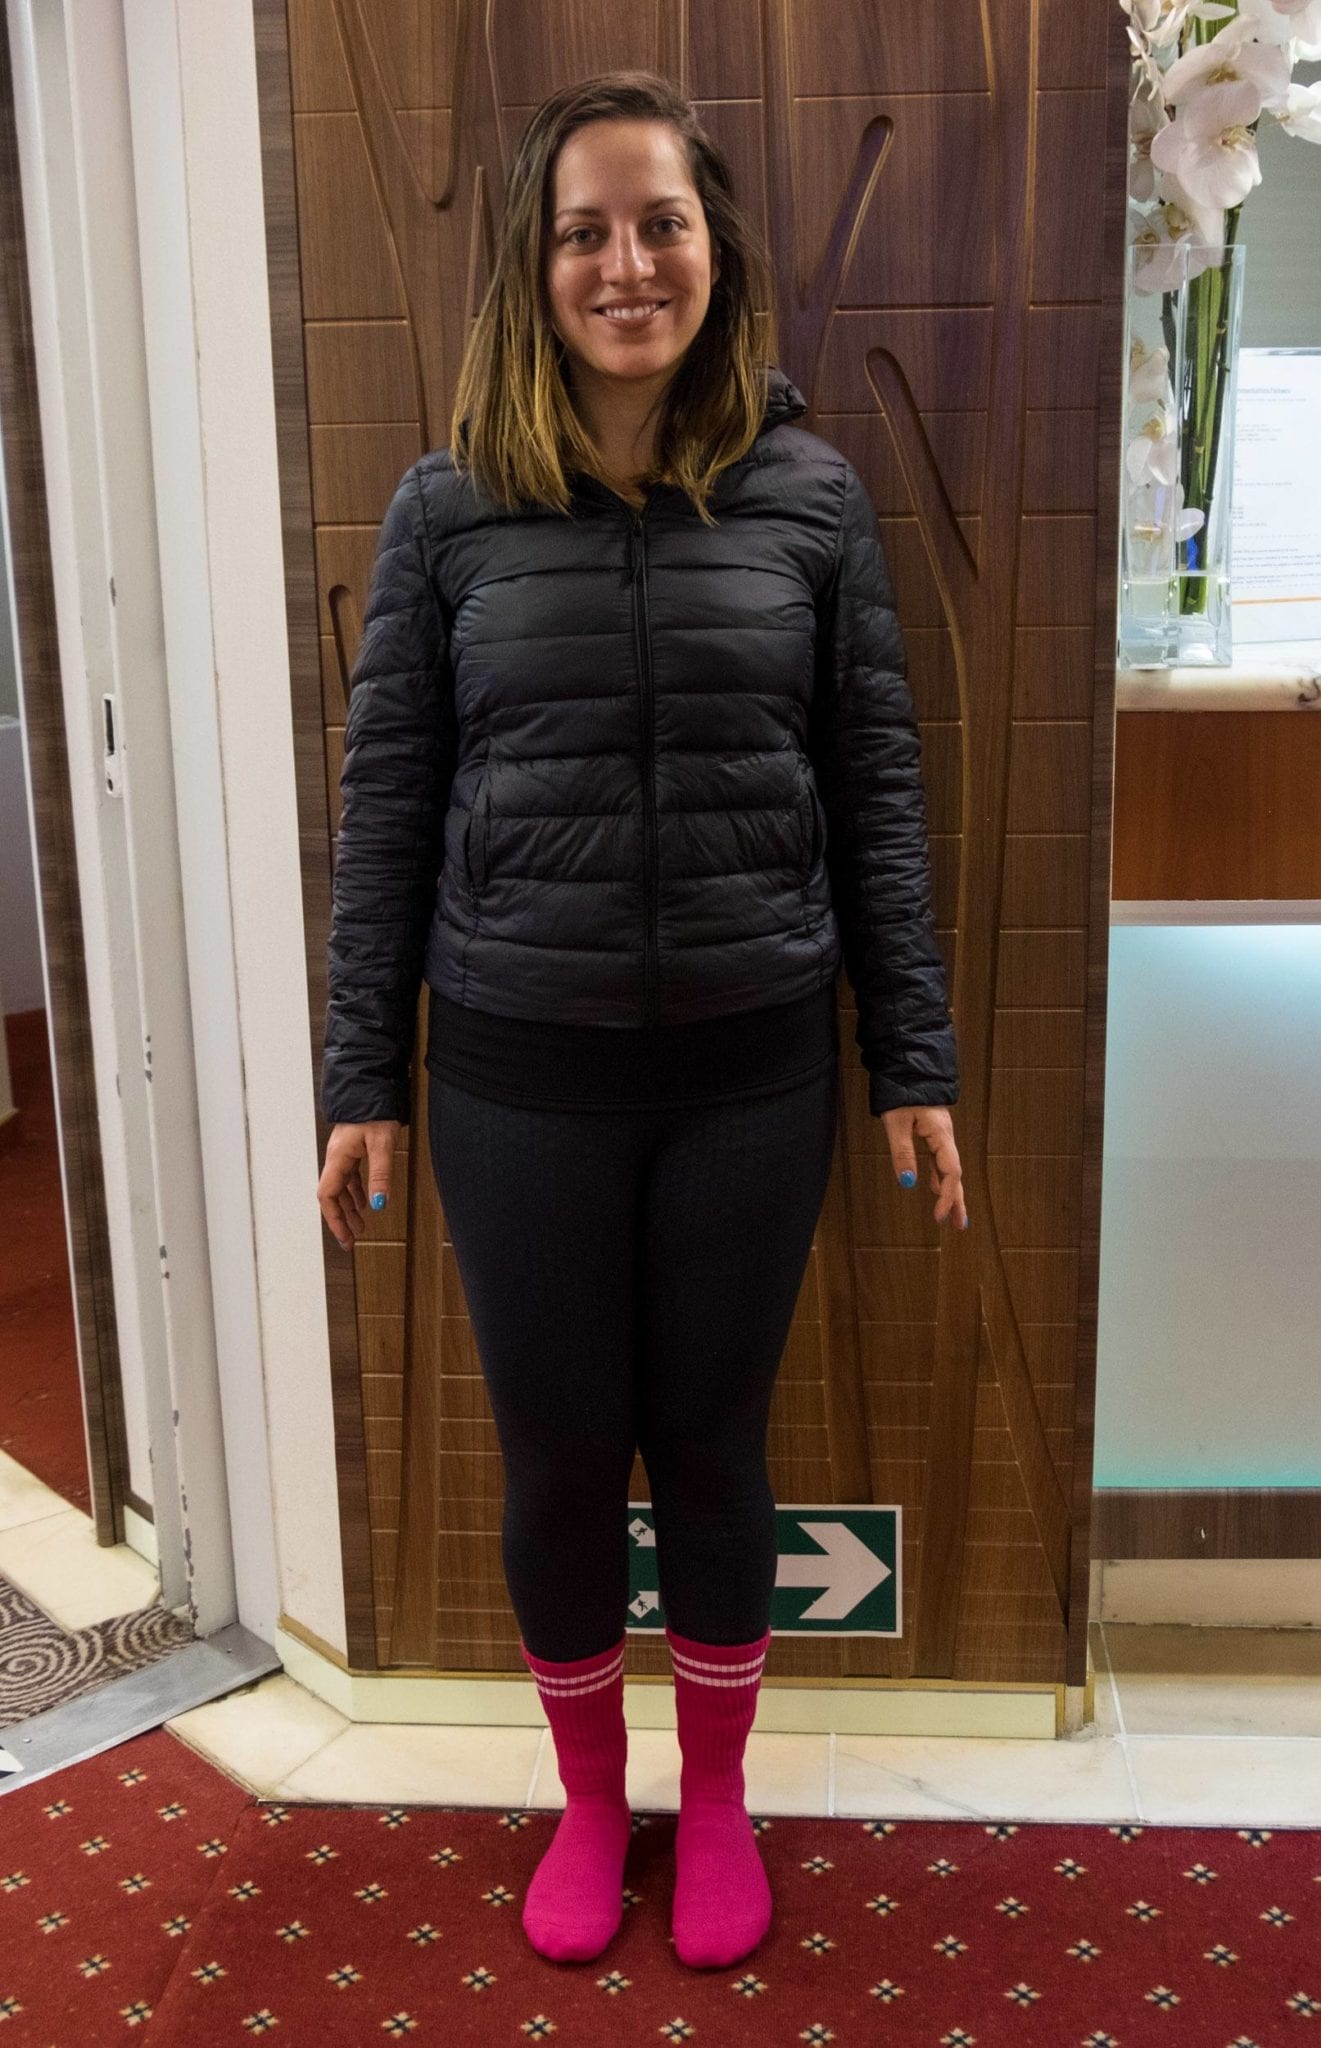 Kate standing in the same position, now with a black puffer jacket, black leggings, and bright pink thick socks on top of what she was wearing before.